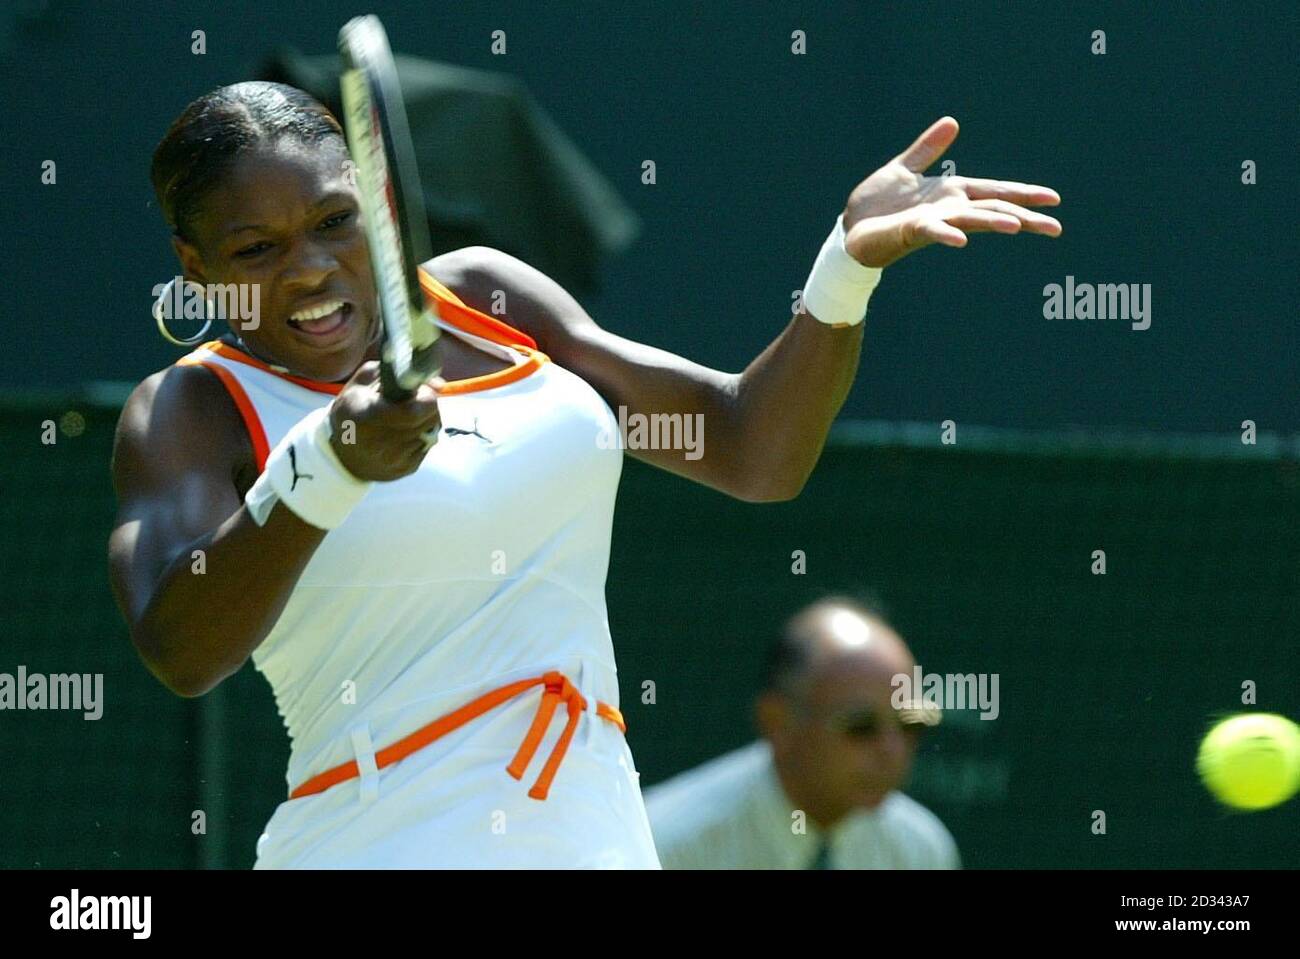 EDITORIAL USE ONLY, NO MOBILE PHONE USE. Defending champion Serena Williams in action on Centre Court against Jill Craybas from the USA at the All England Lawn Tennis Championships in Wimbledon. Williams defeated Craybas in straight sets 6-3, 6-3. Stock Photo